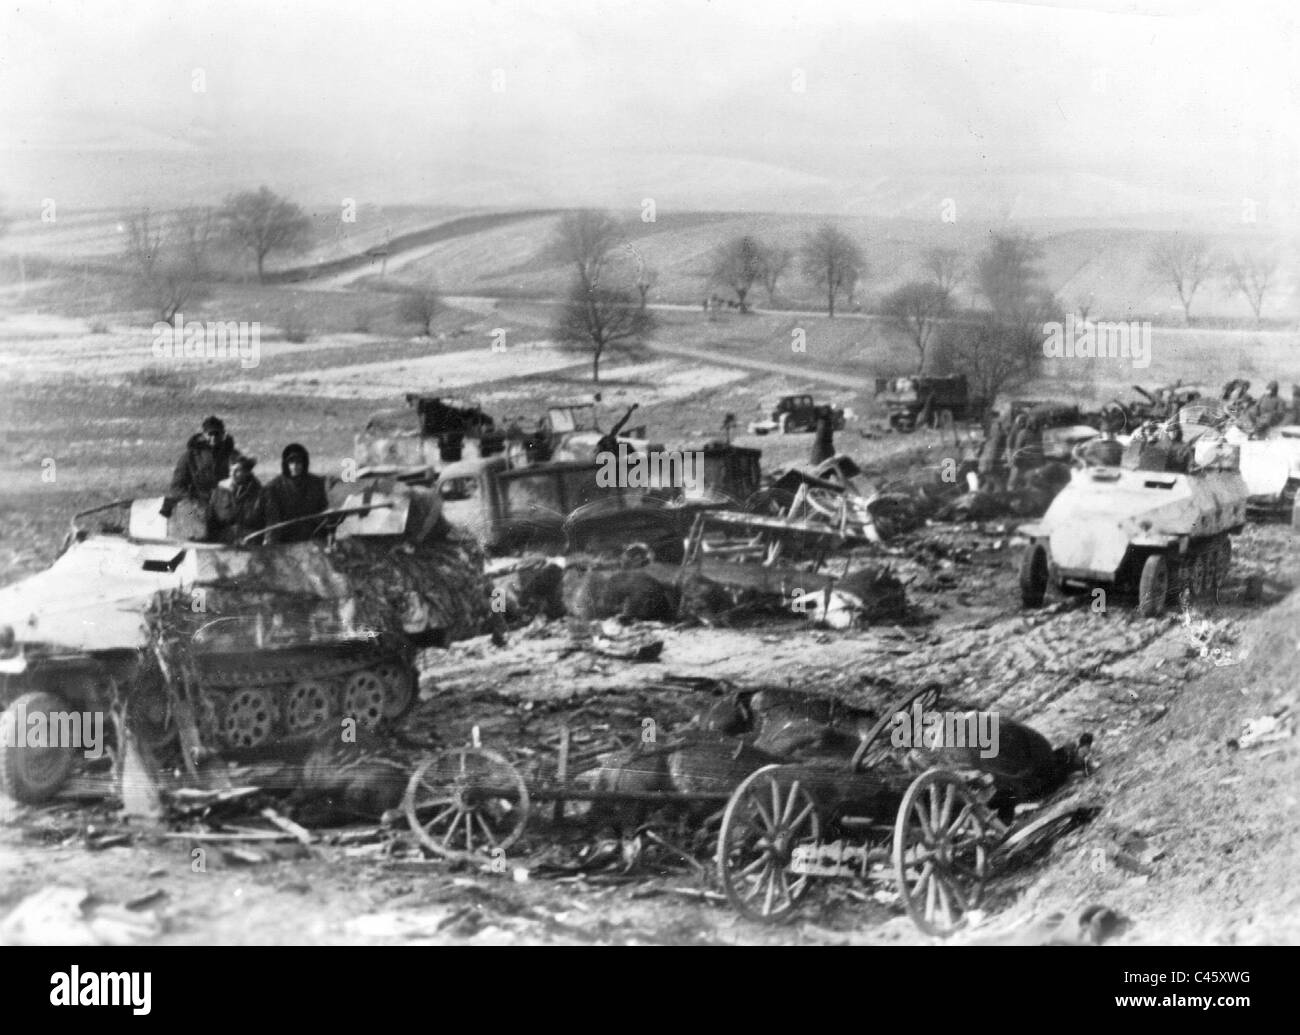 Armored personnel carriers of the Waffen SS on the advance in Hungary, 1945 Stock Photo